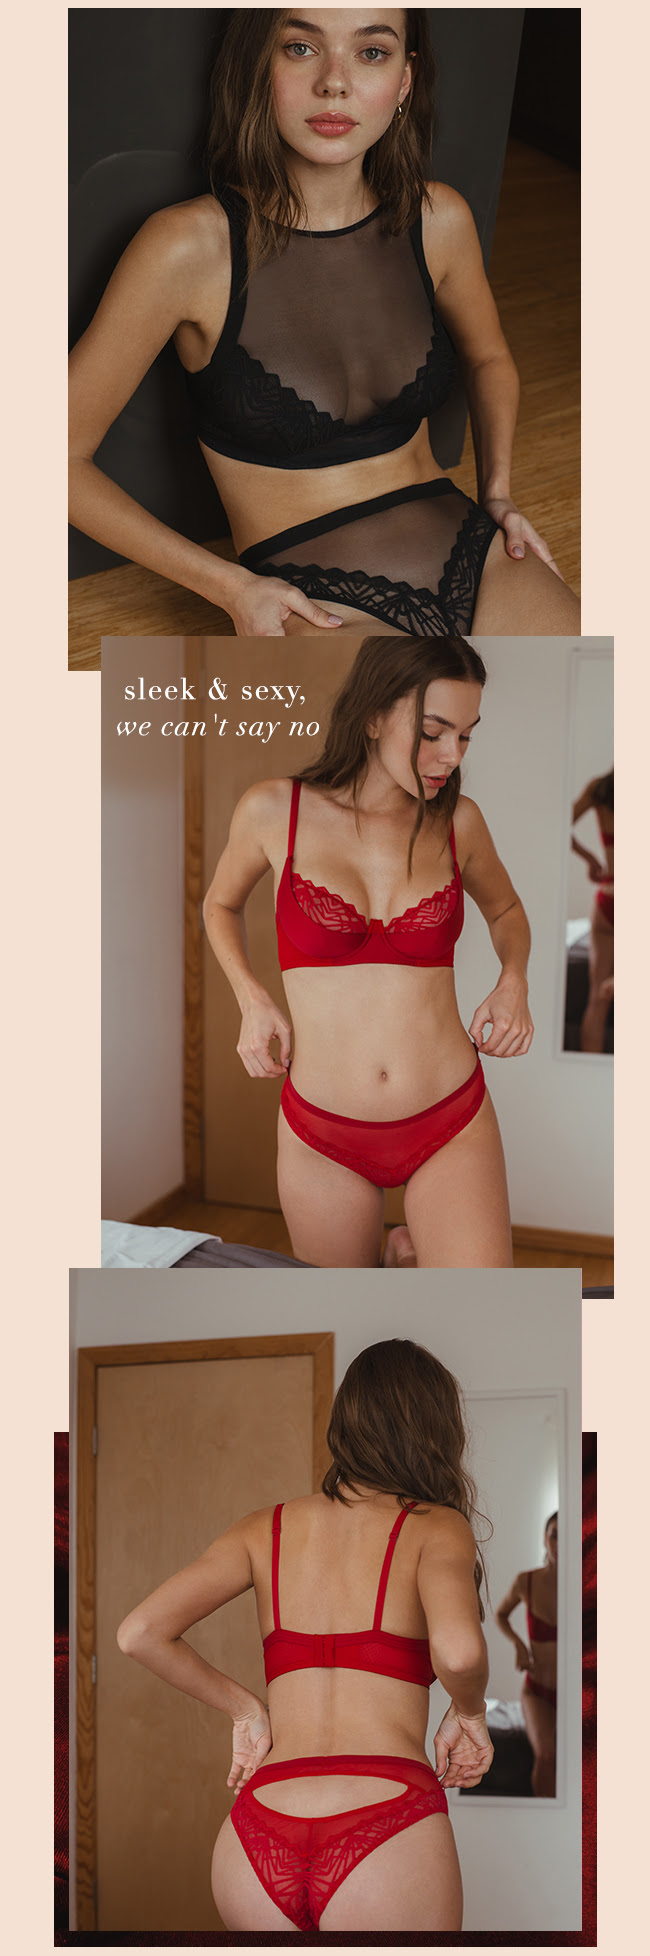 Cosabella - Because this lingerie looks good on anyone